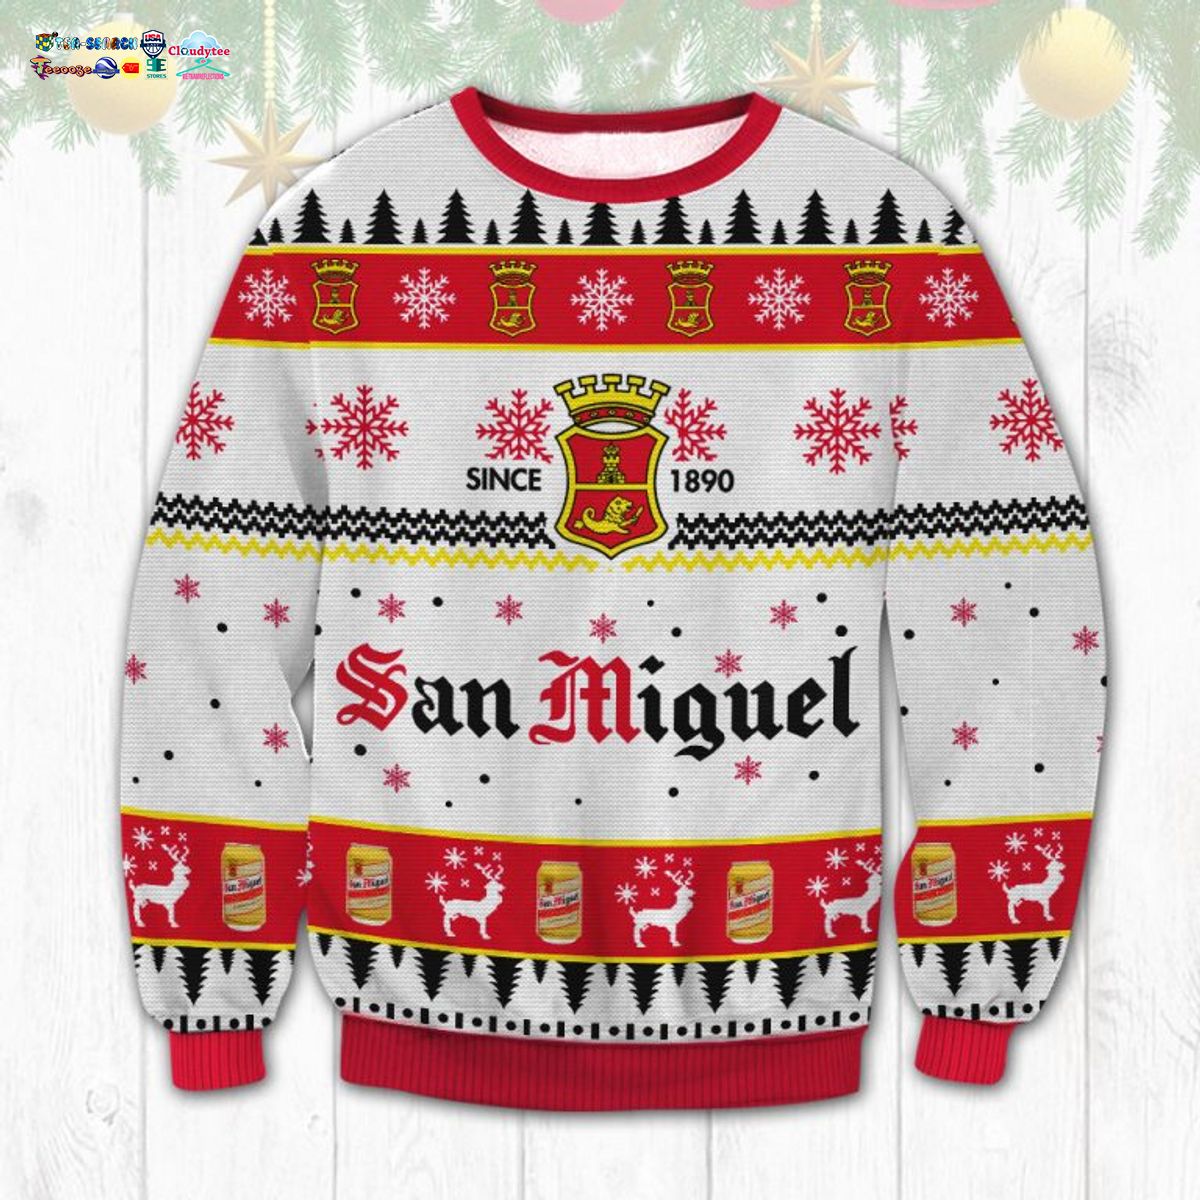 San Miguel Ugly Christmas Sweater - Elegant picture.